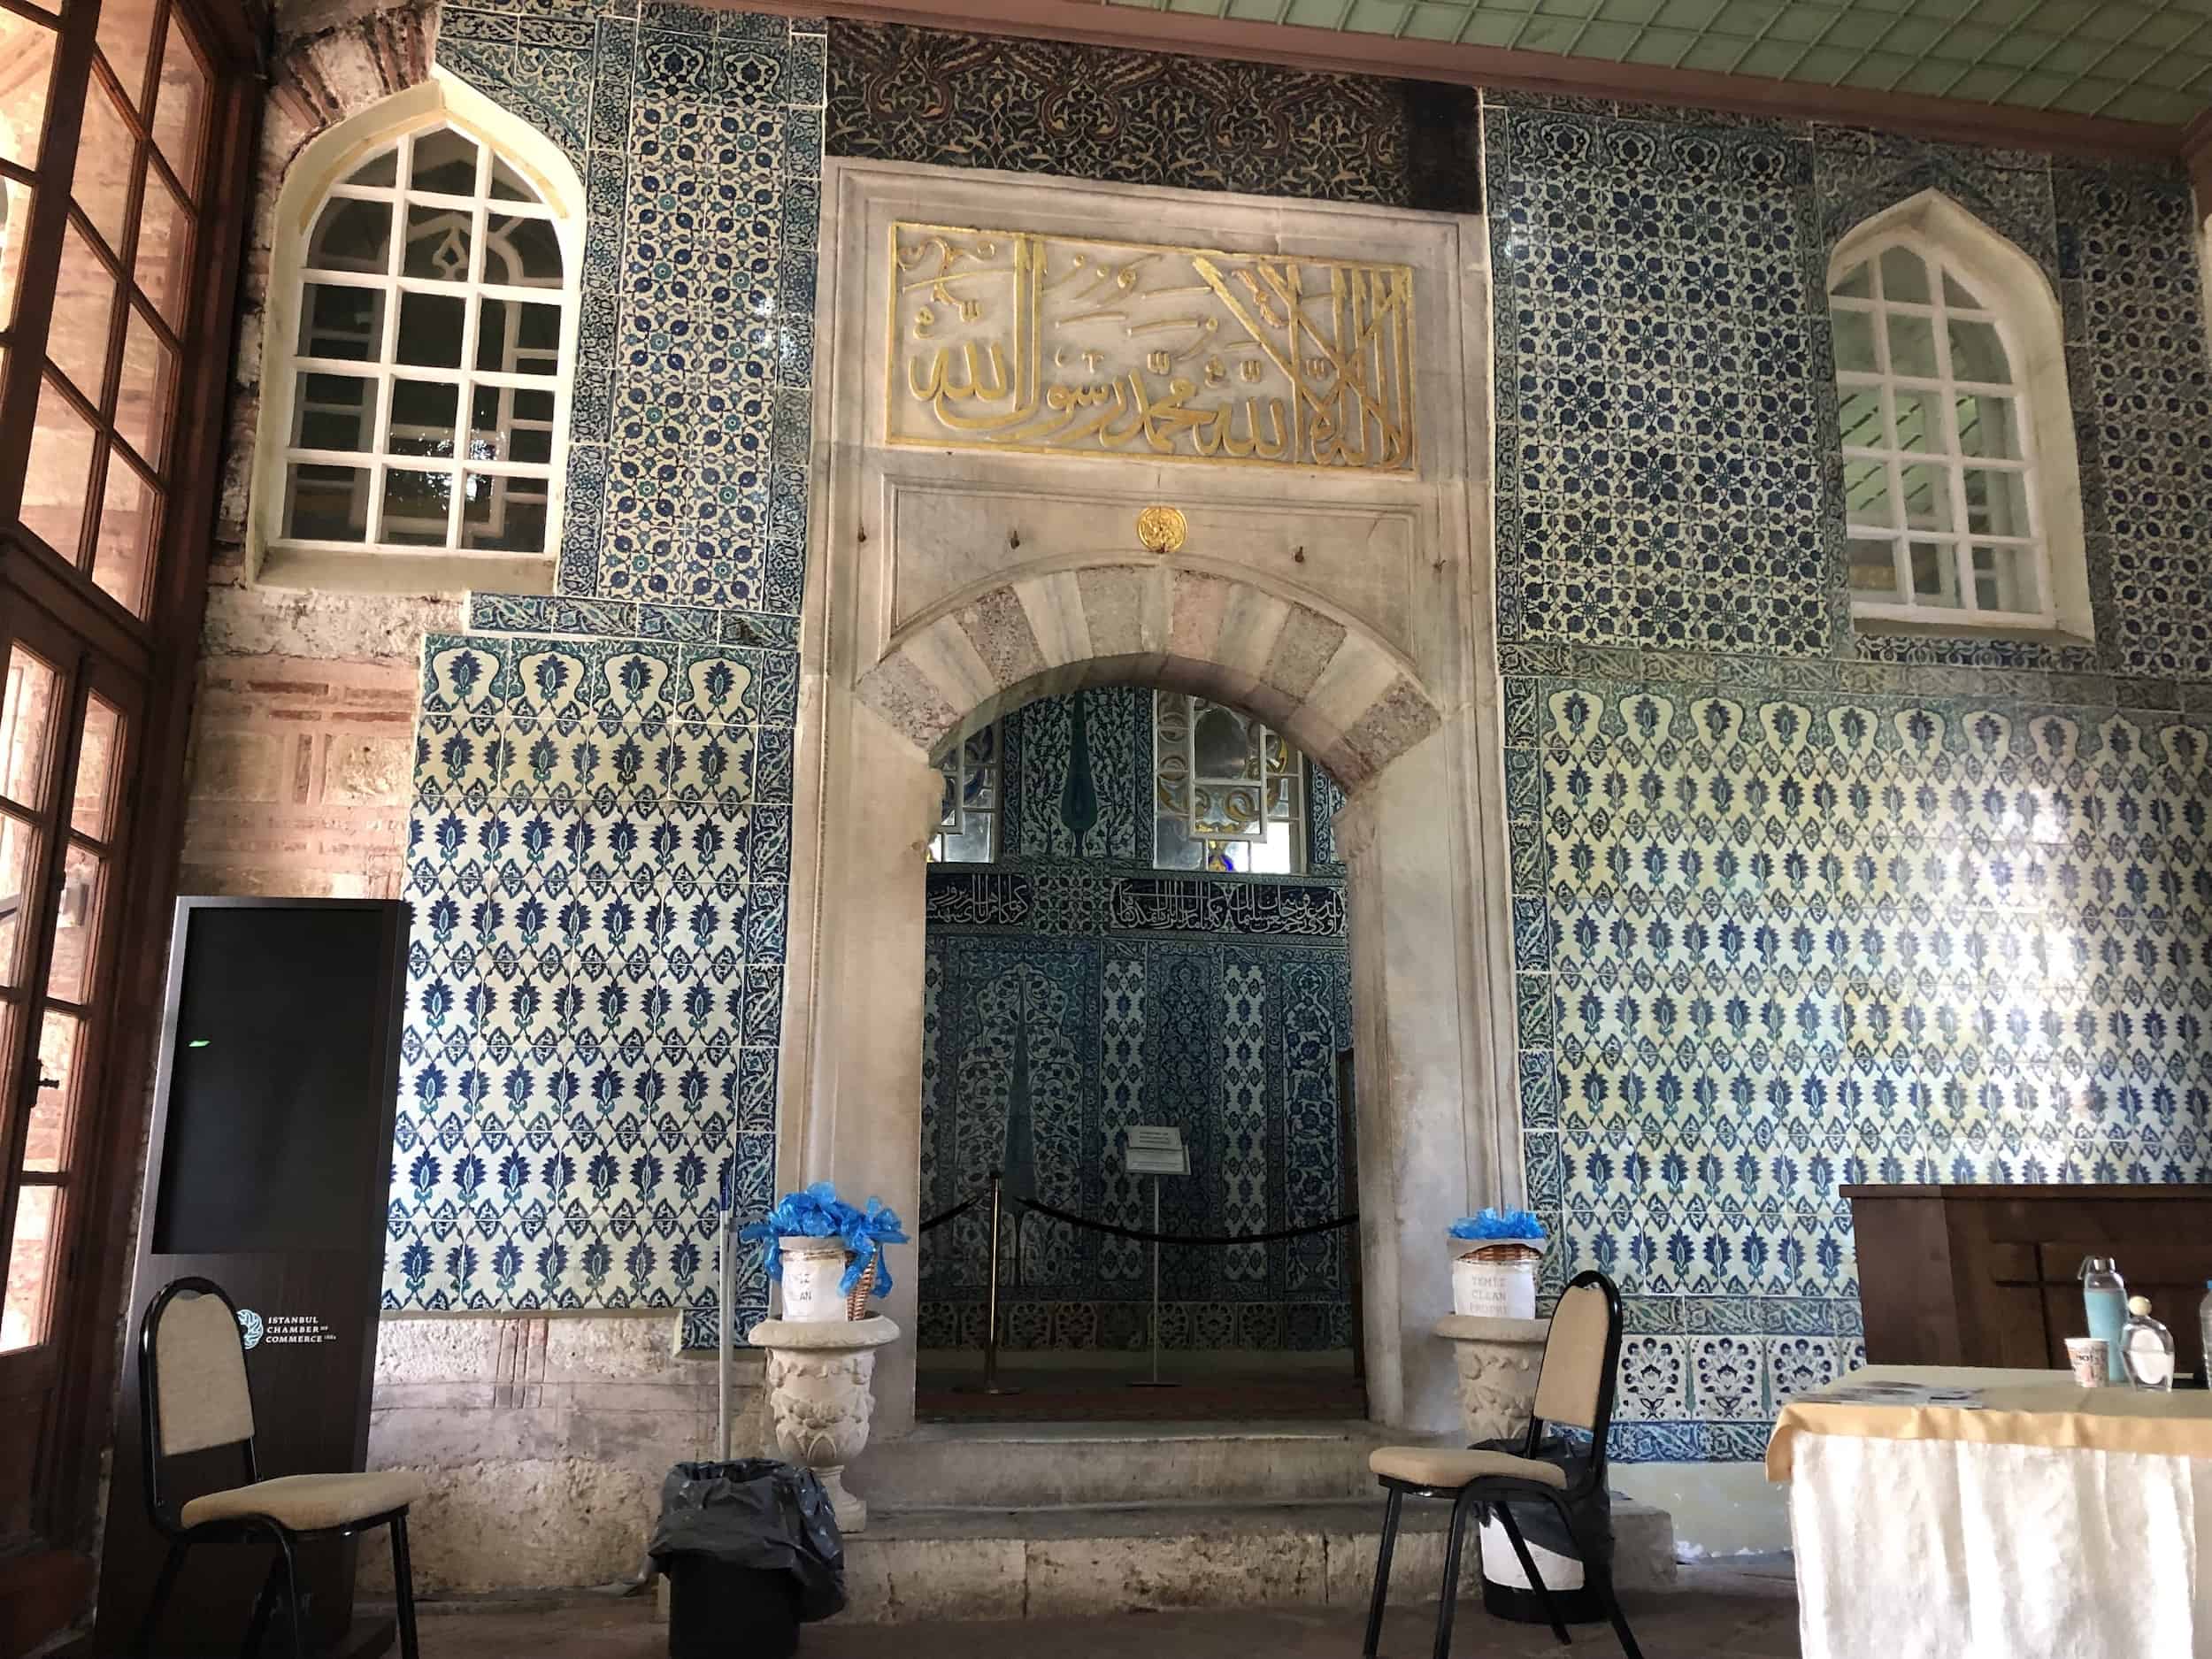 Entrance at the Sultan's Pavilion at the New Mosque in Eminönü, Istanbul, Turkey